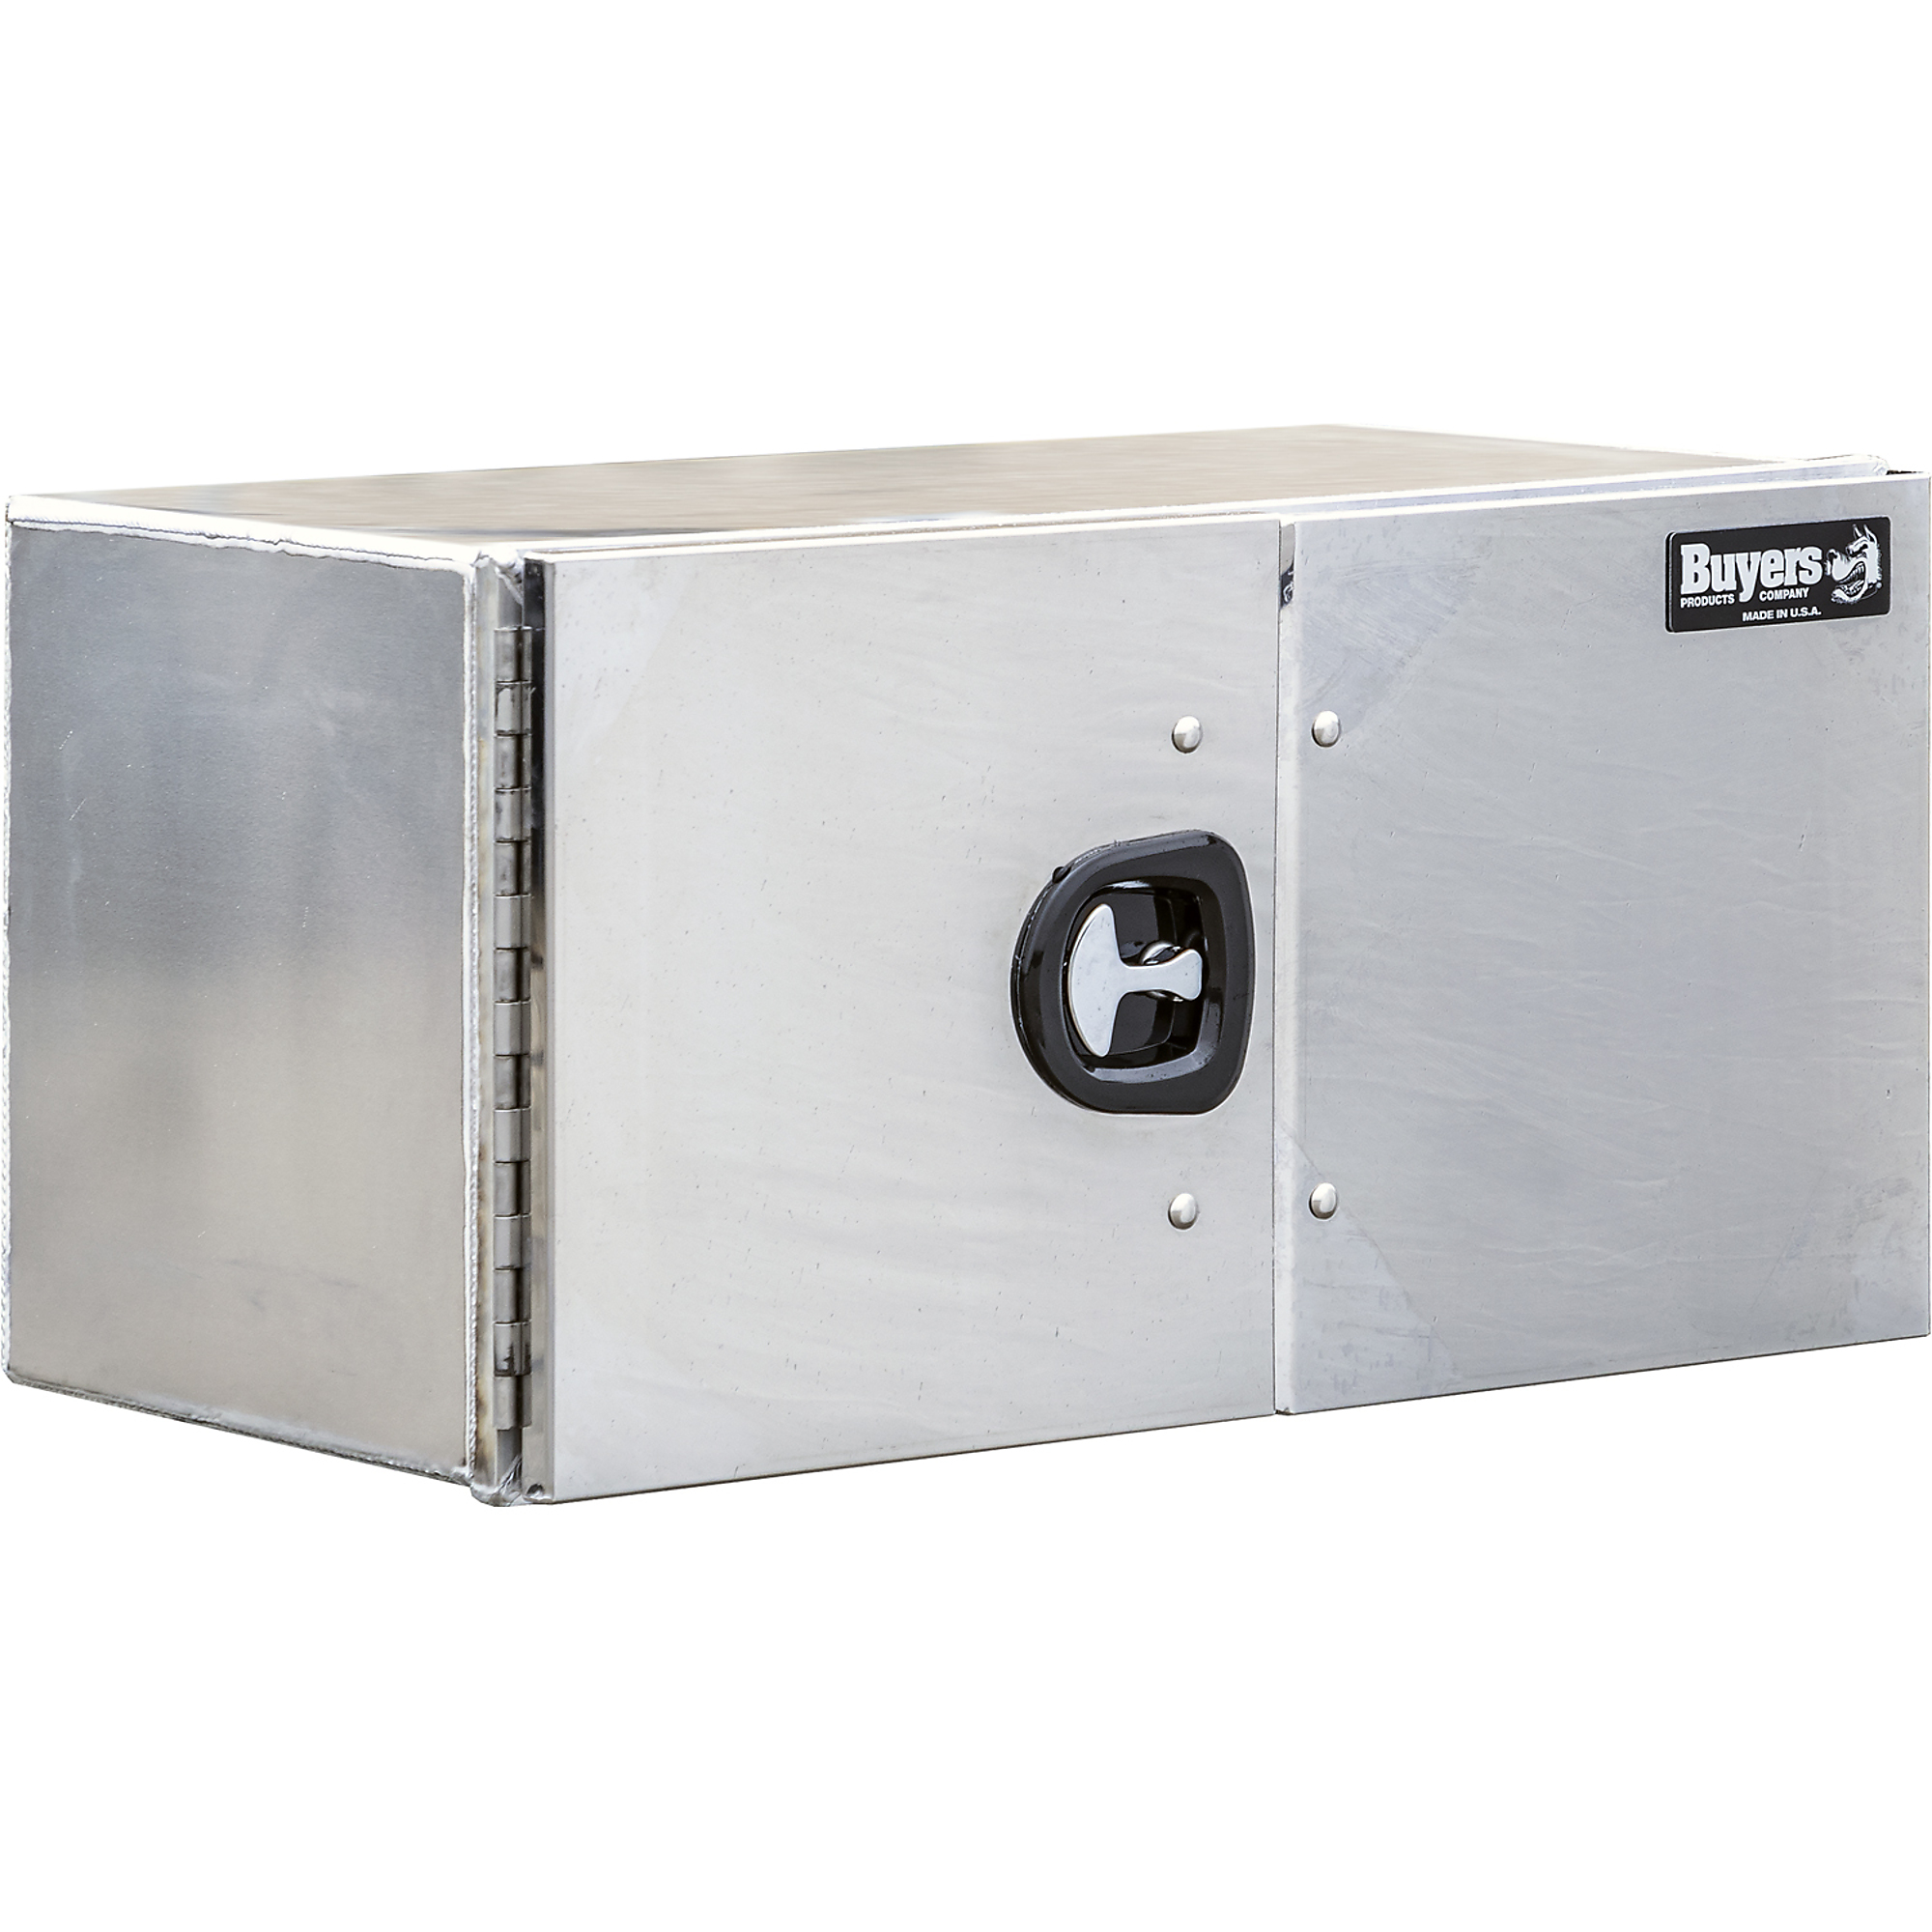 Buyers Products, 18x18x48 Aluminum Barn Door Underbody Truck Box, Width 18 in, Material Aluminum, Color Finish Smooth Silver, Model 1705515